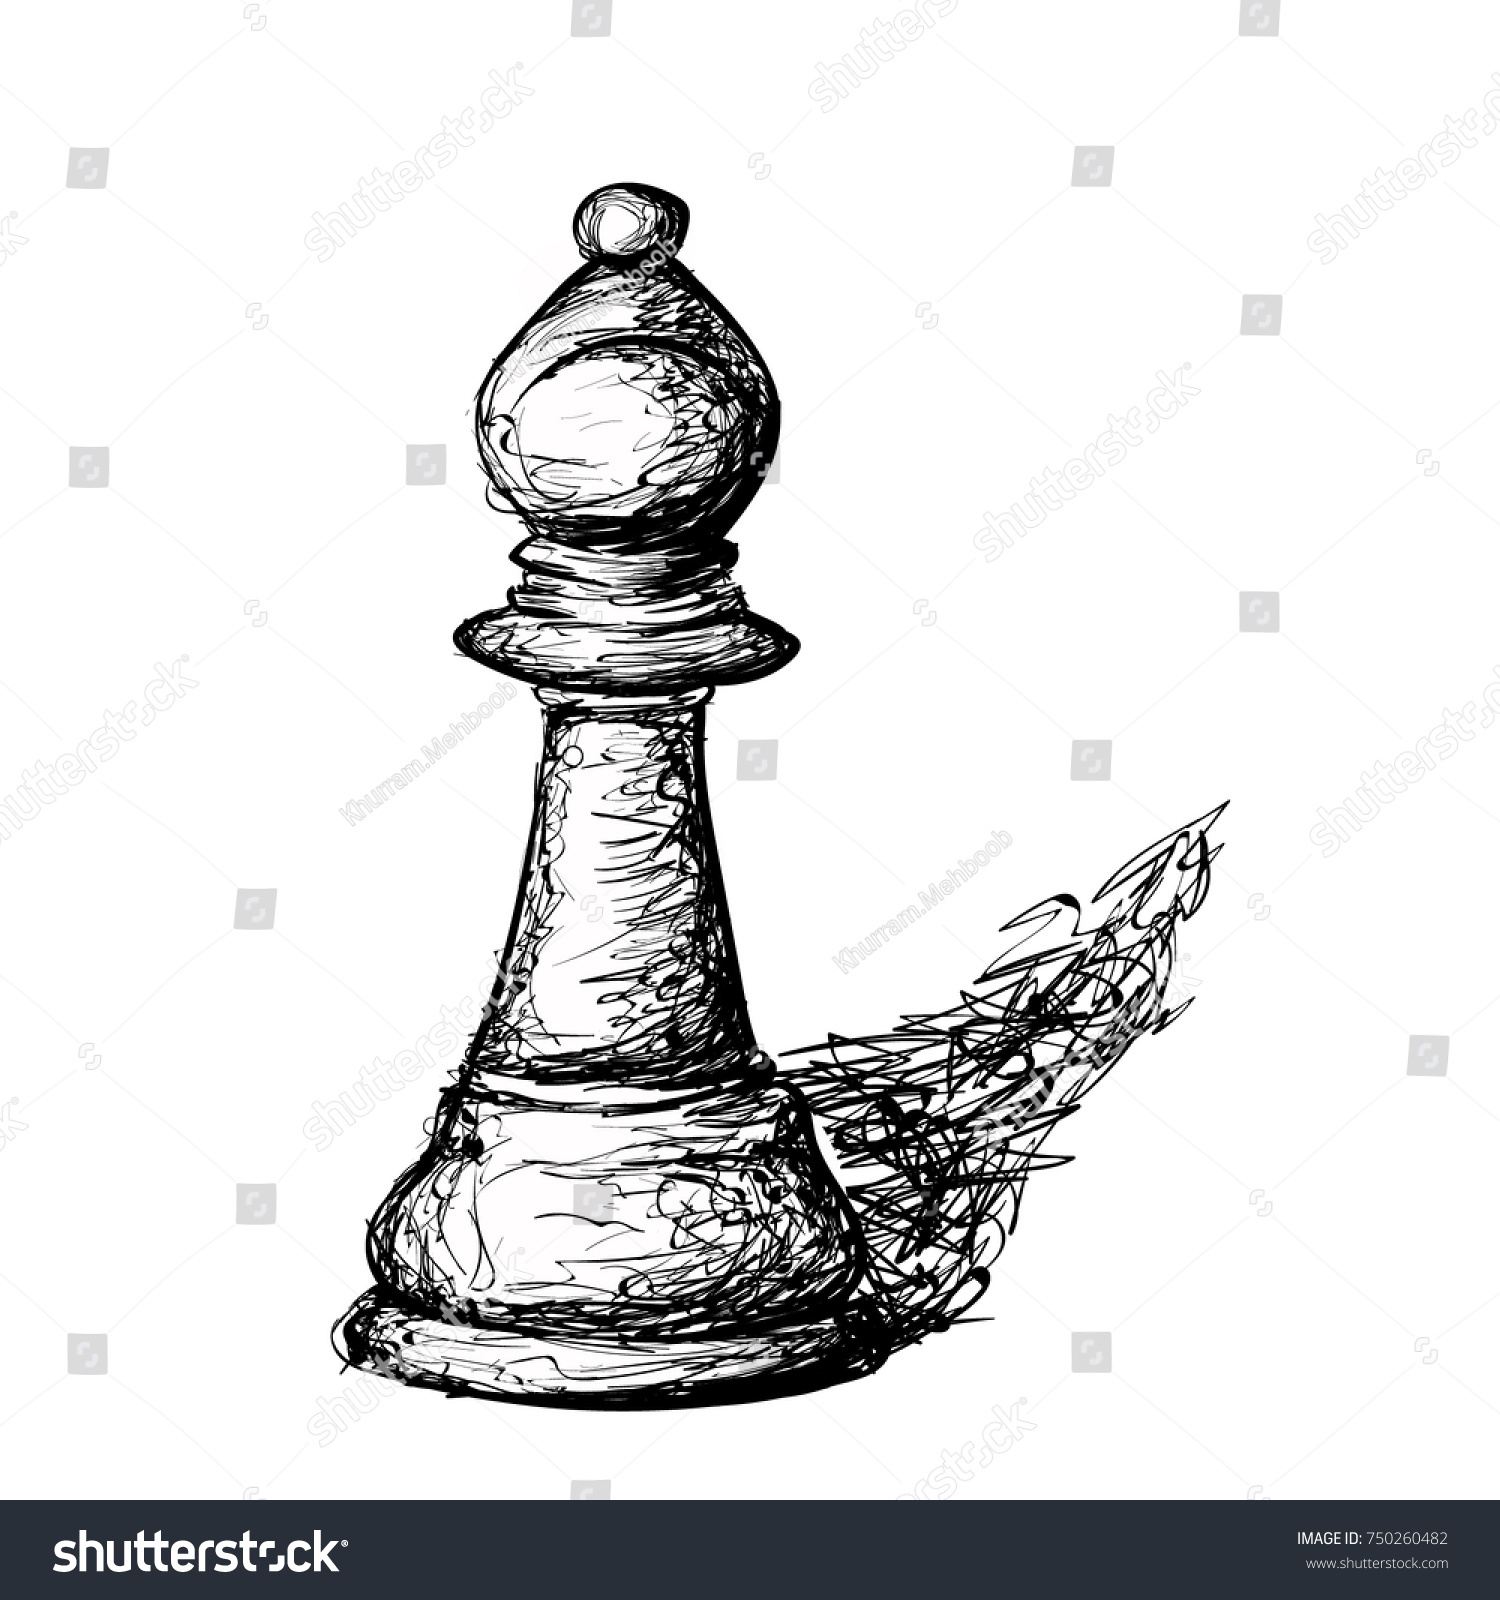 Cute Chess Sketch Drawing for Kids